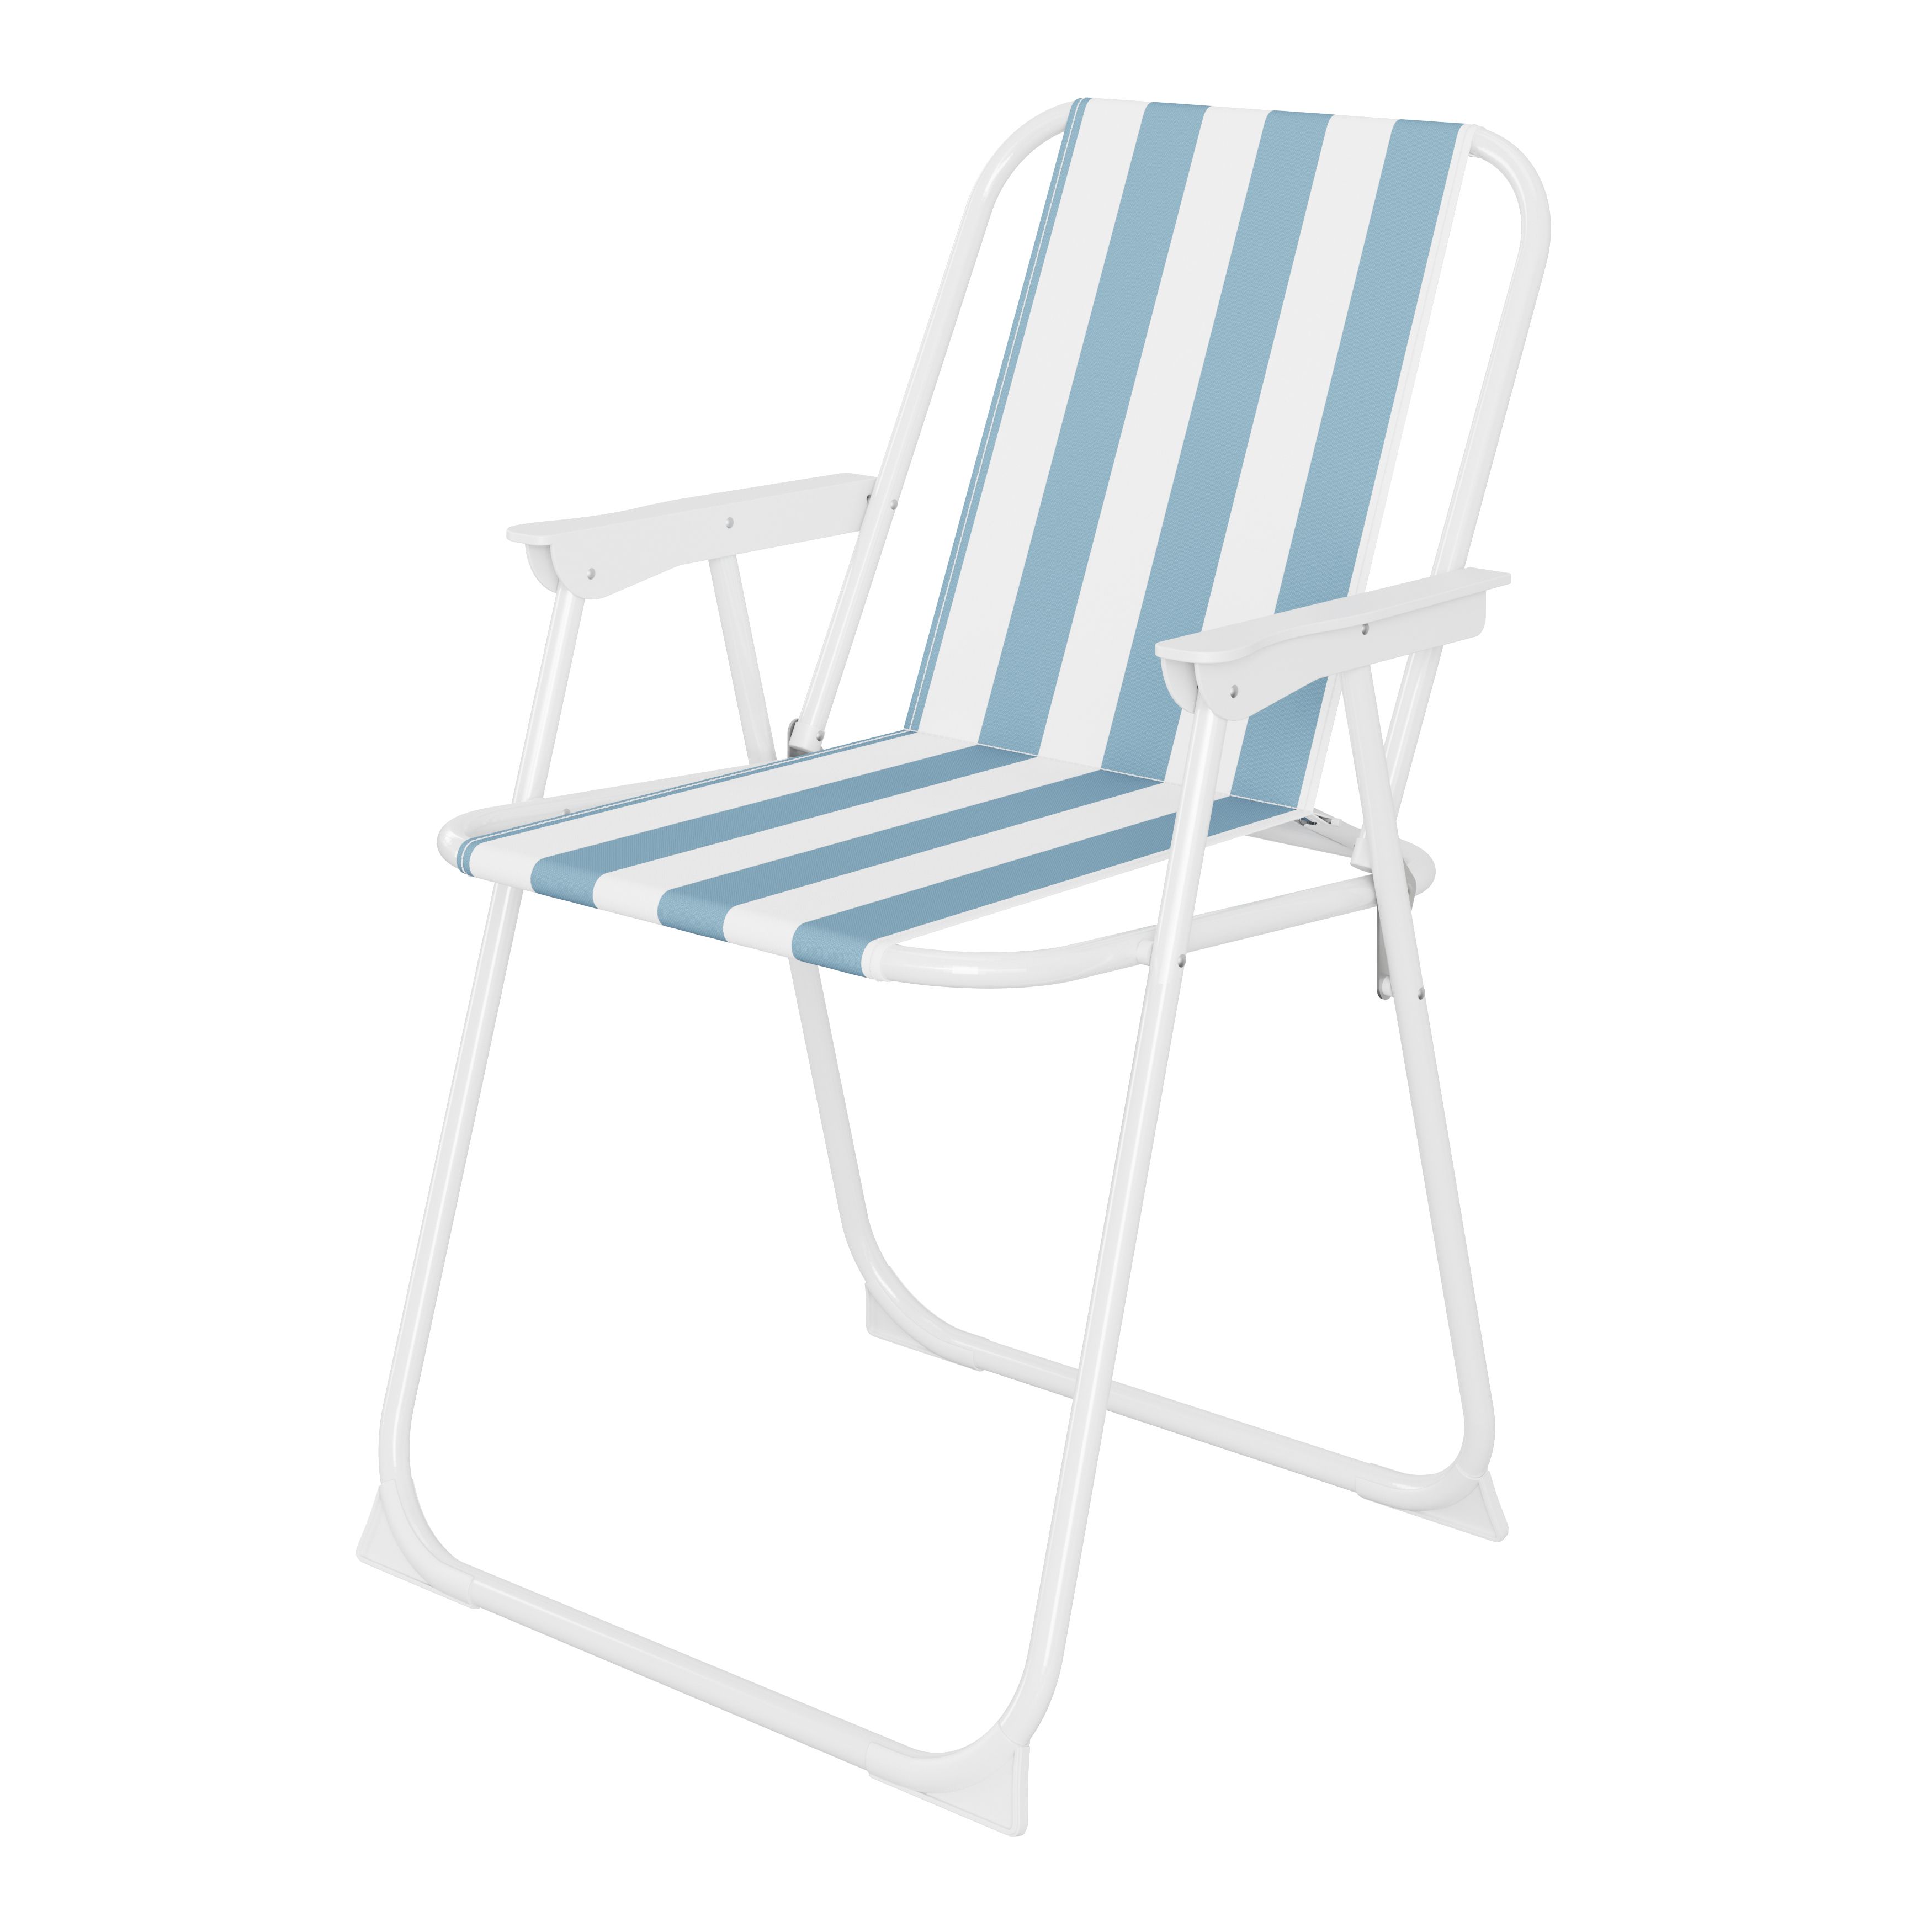 Curacao Still water blue Metal Foldable Cabana striped Picnic chair